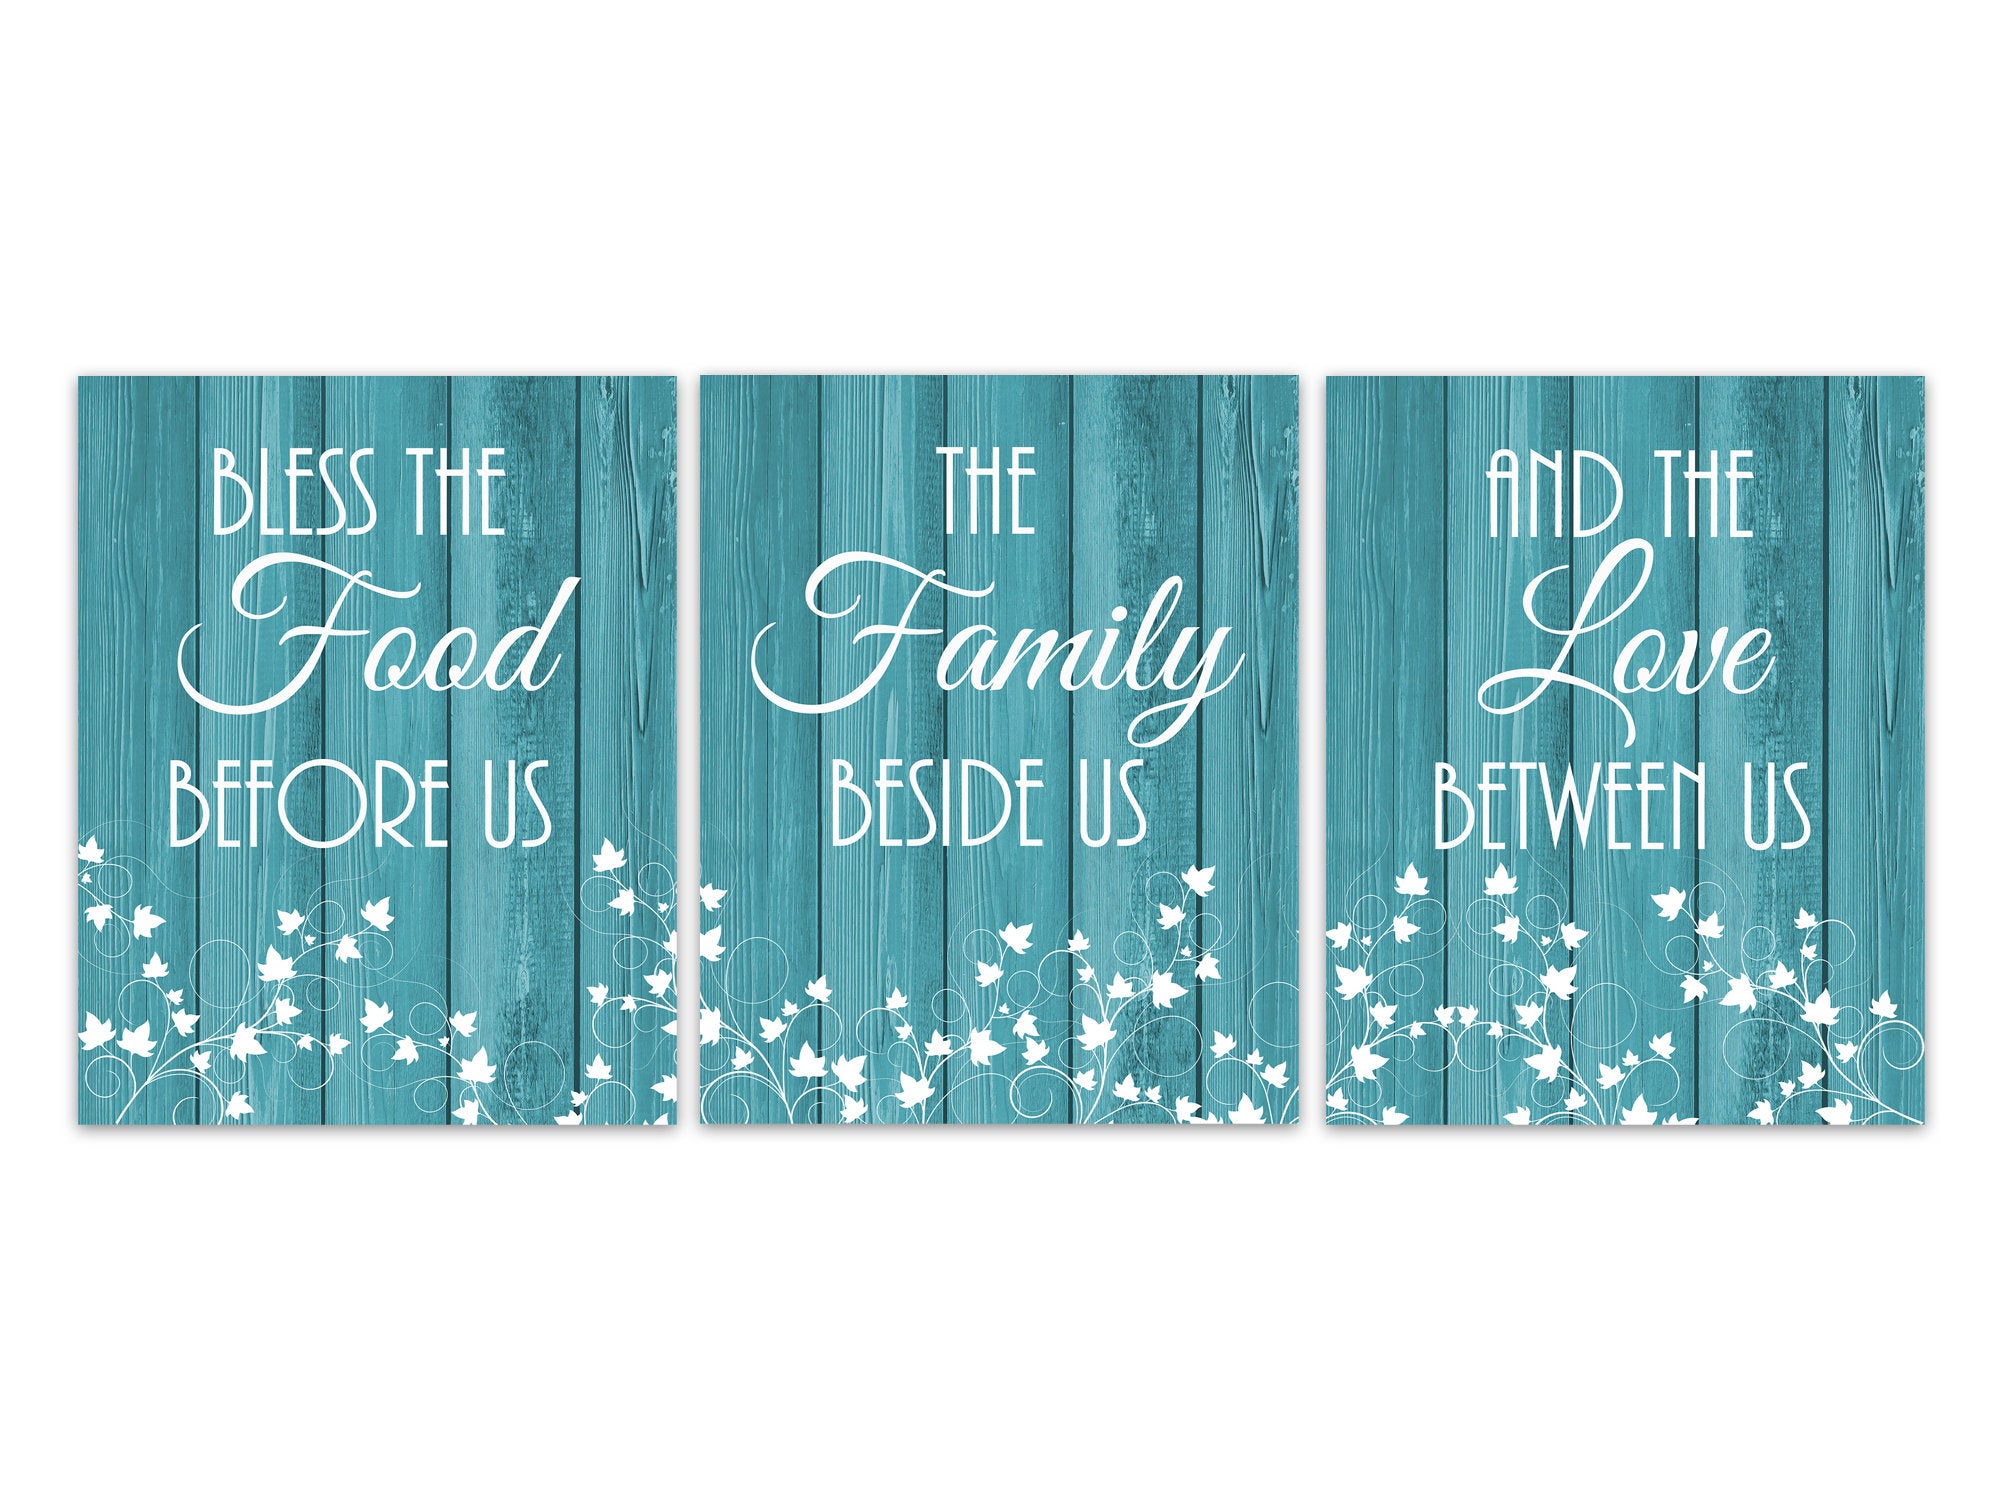 Teal Kitchen CANVAS or PRINTS, Bless The Food Before Us Kitchen Quote Art, Dining Room Pictures, Kitchen Decor, Farmhouse Decor - HOME363